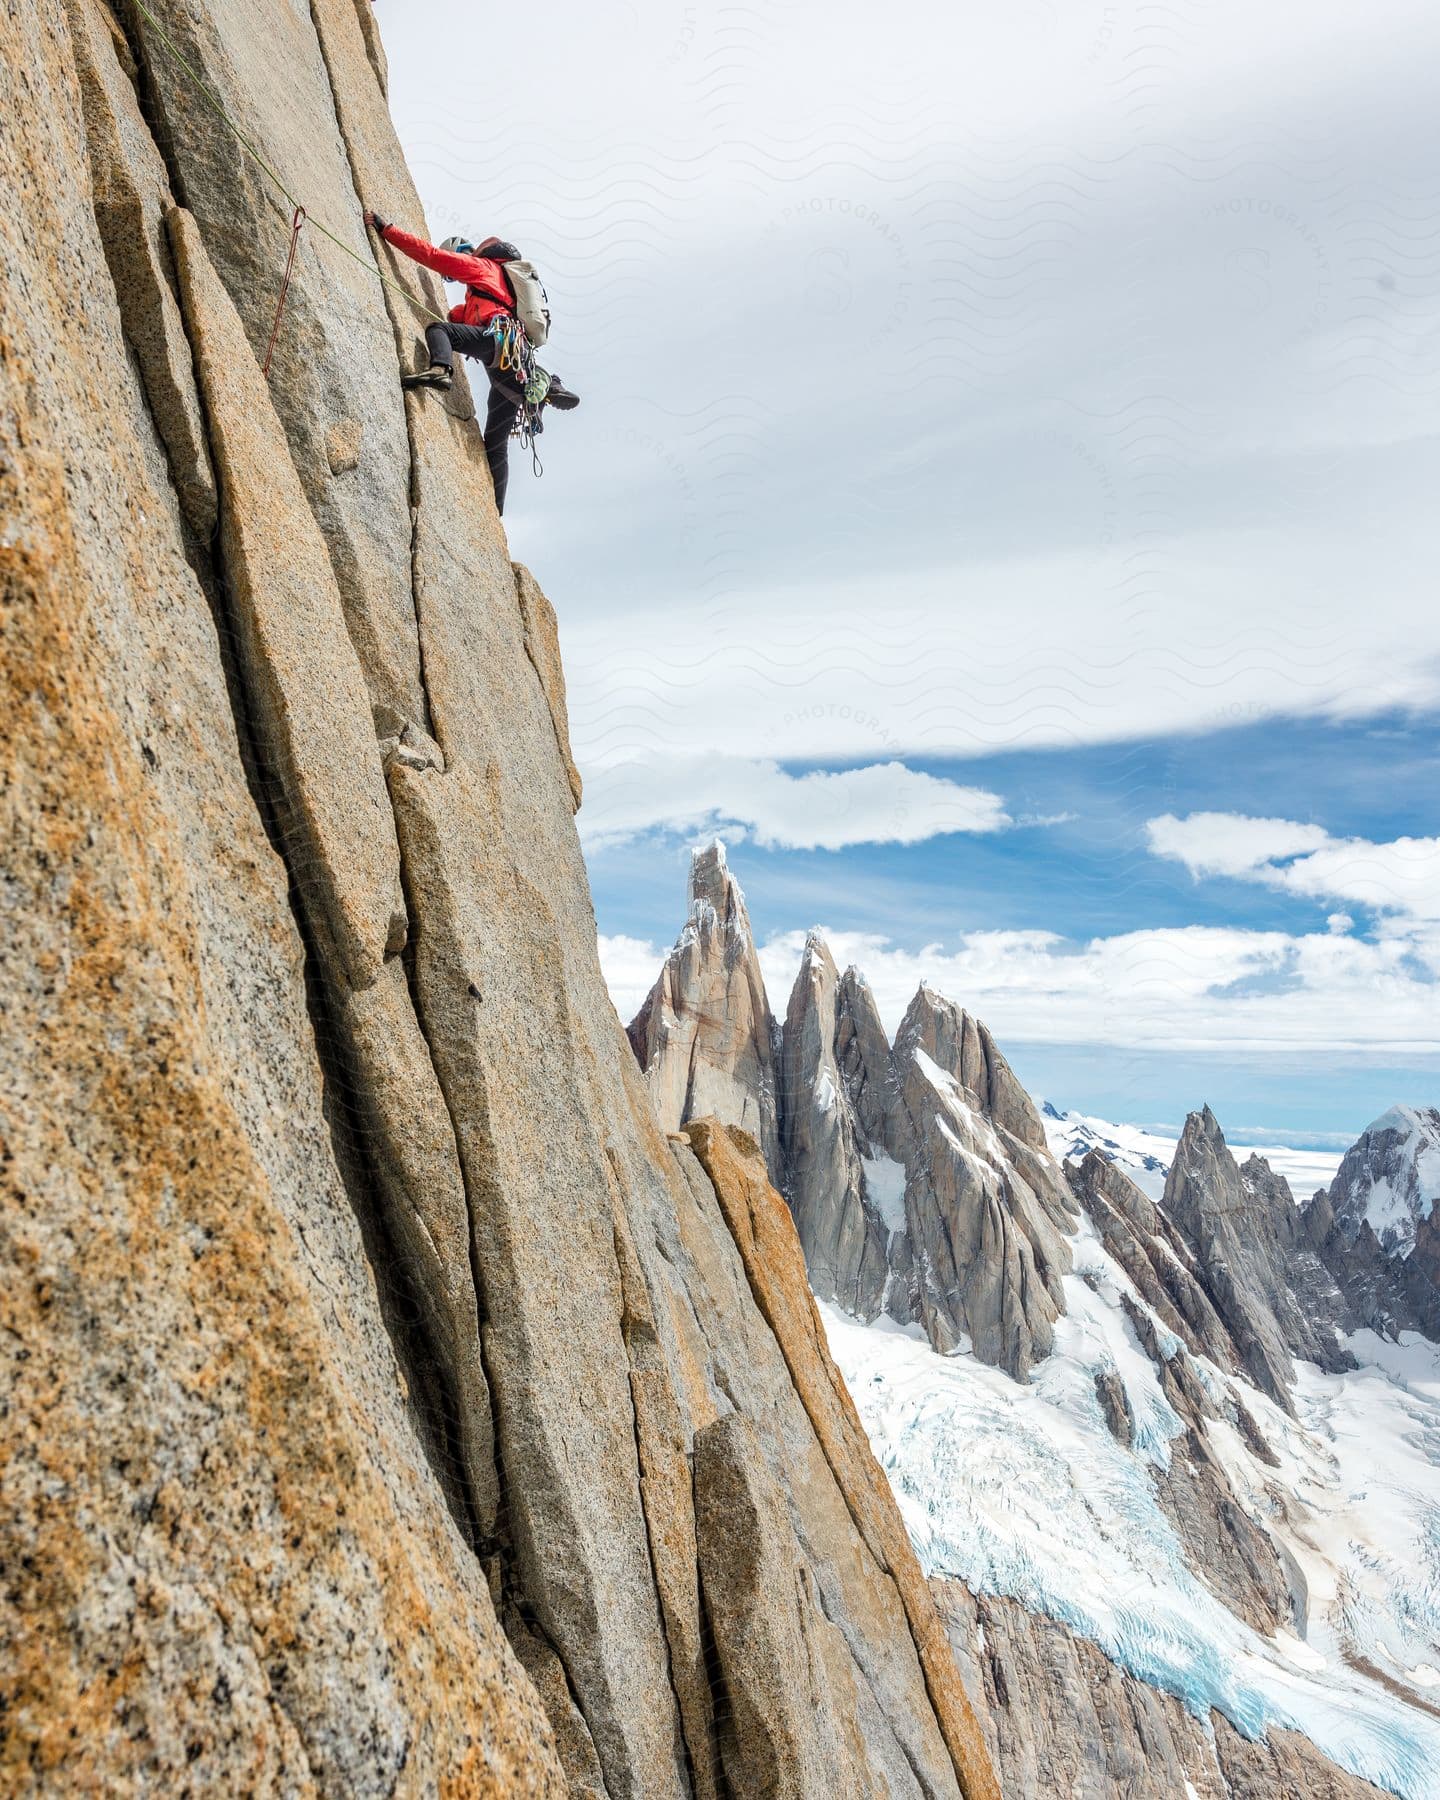 A redjacketed rock climber ascends a cloudy mountainside equipped with helmet rope and guide with snowcapped peaks in the distance